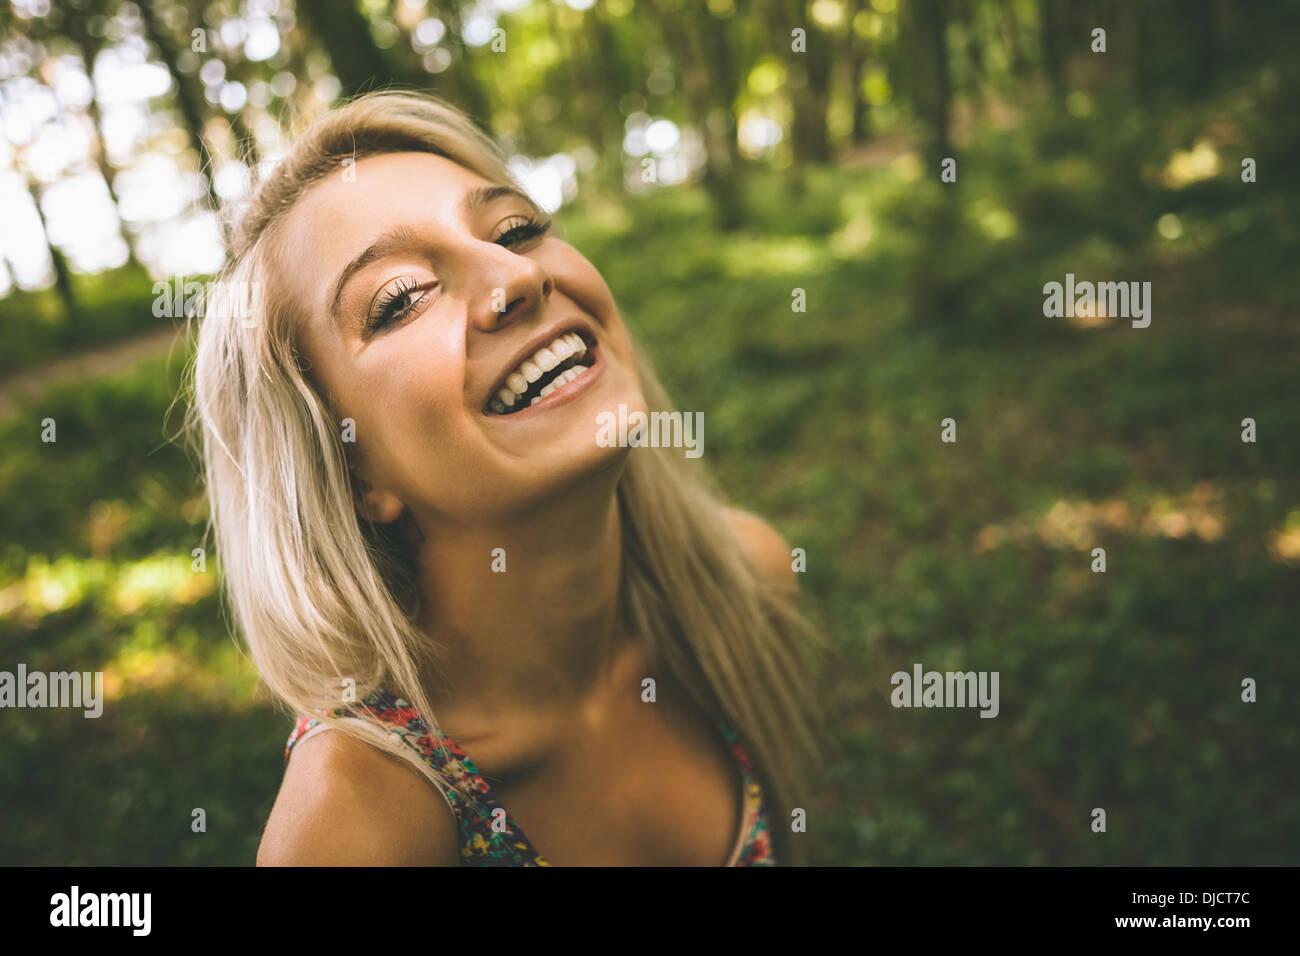 Cheerful gorgeous blonde looking at camera Stock Photo